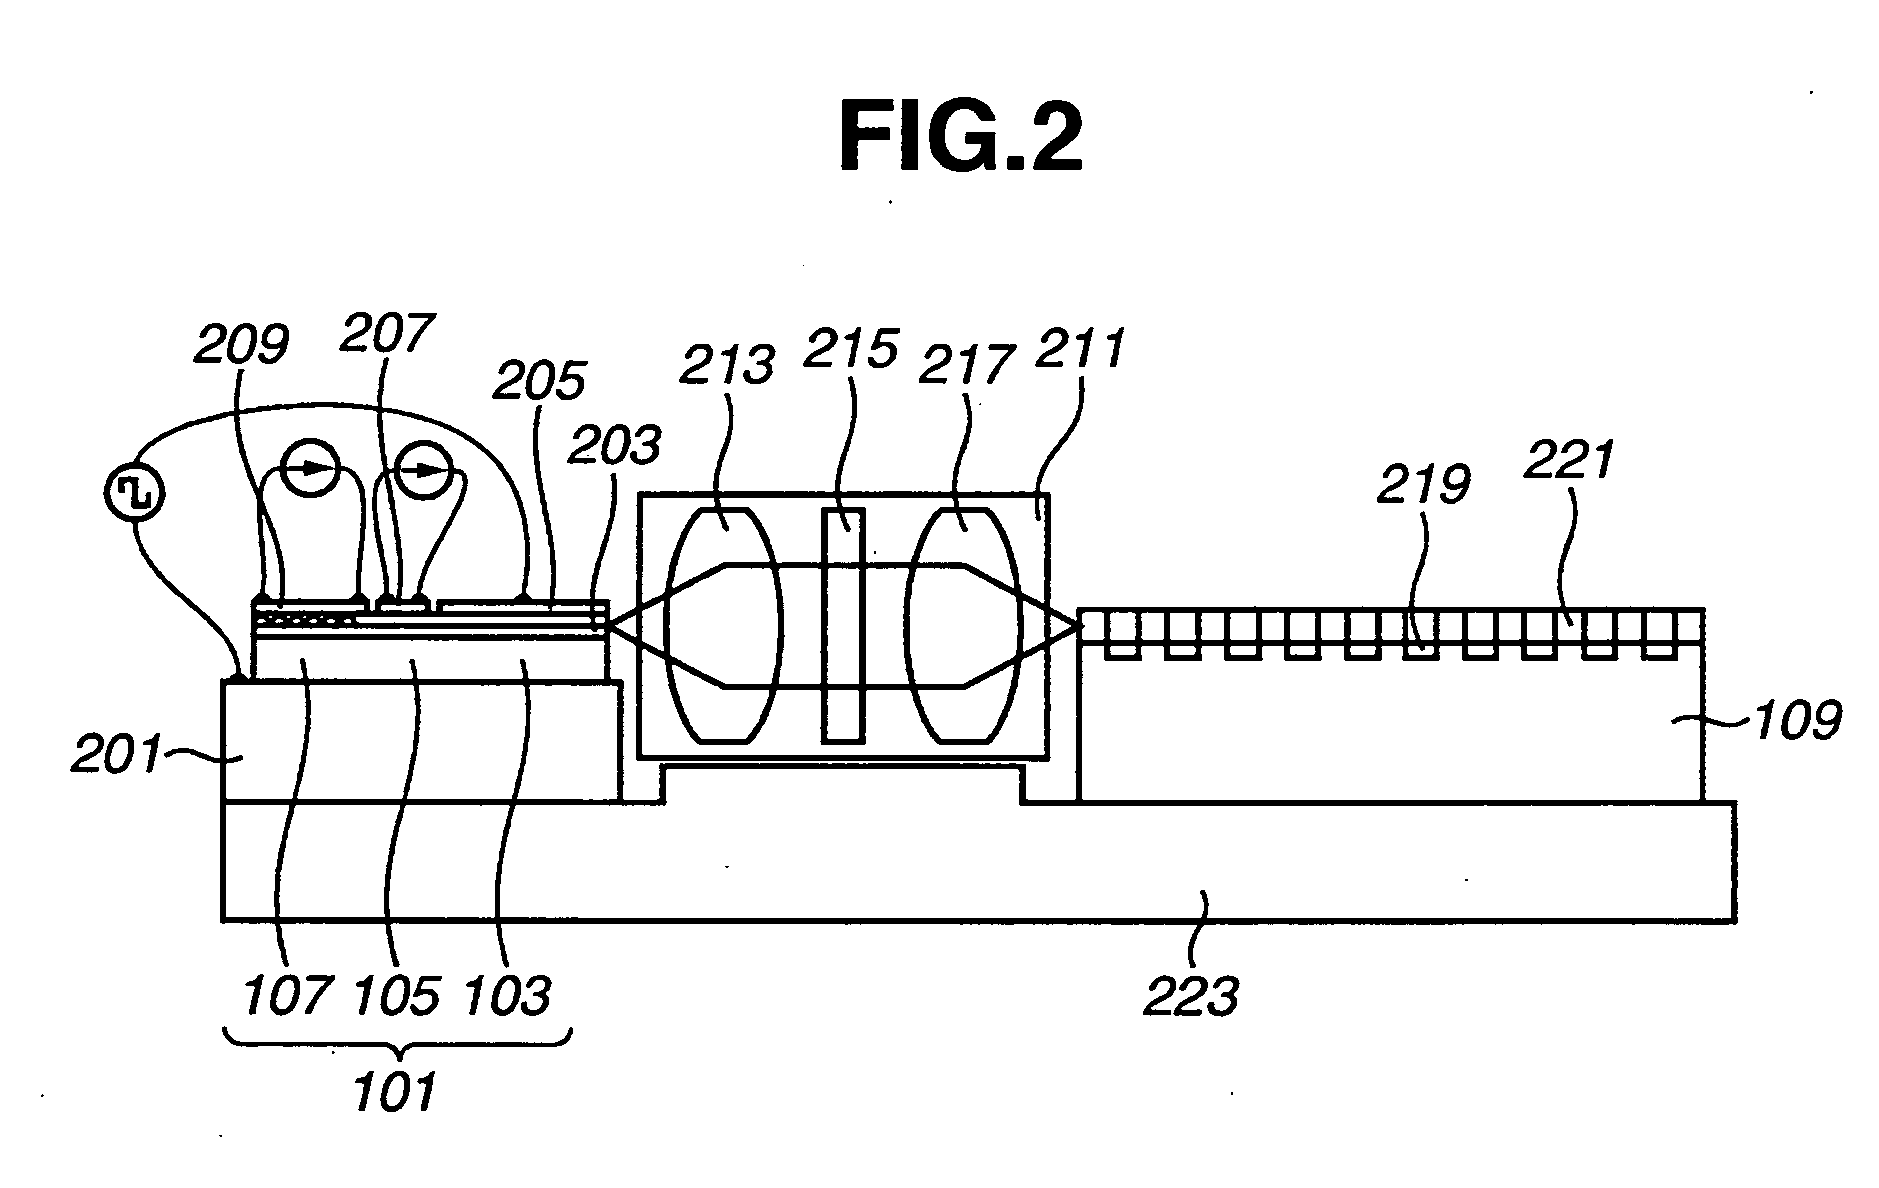 Light wavelength converting apparatus, control method of the same, and image projecting apparatus using the same